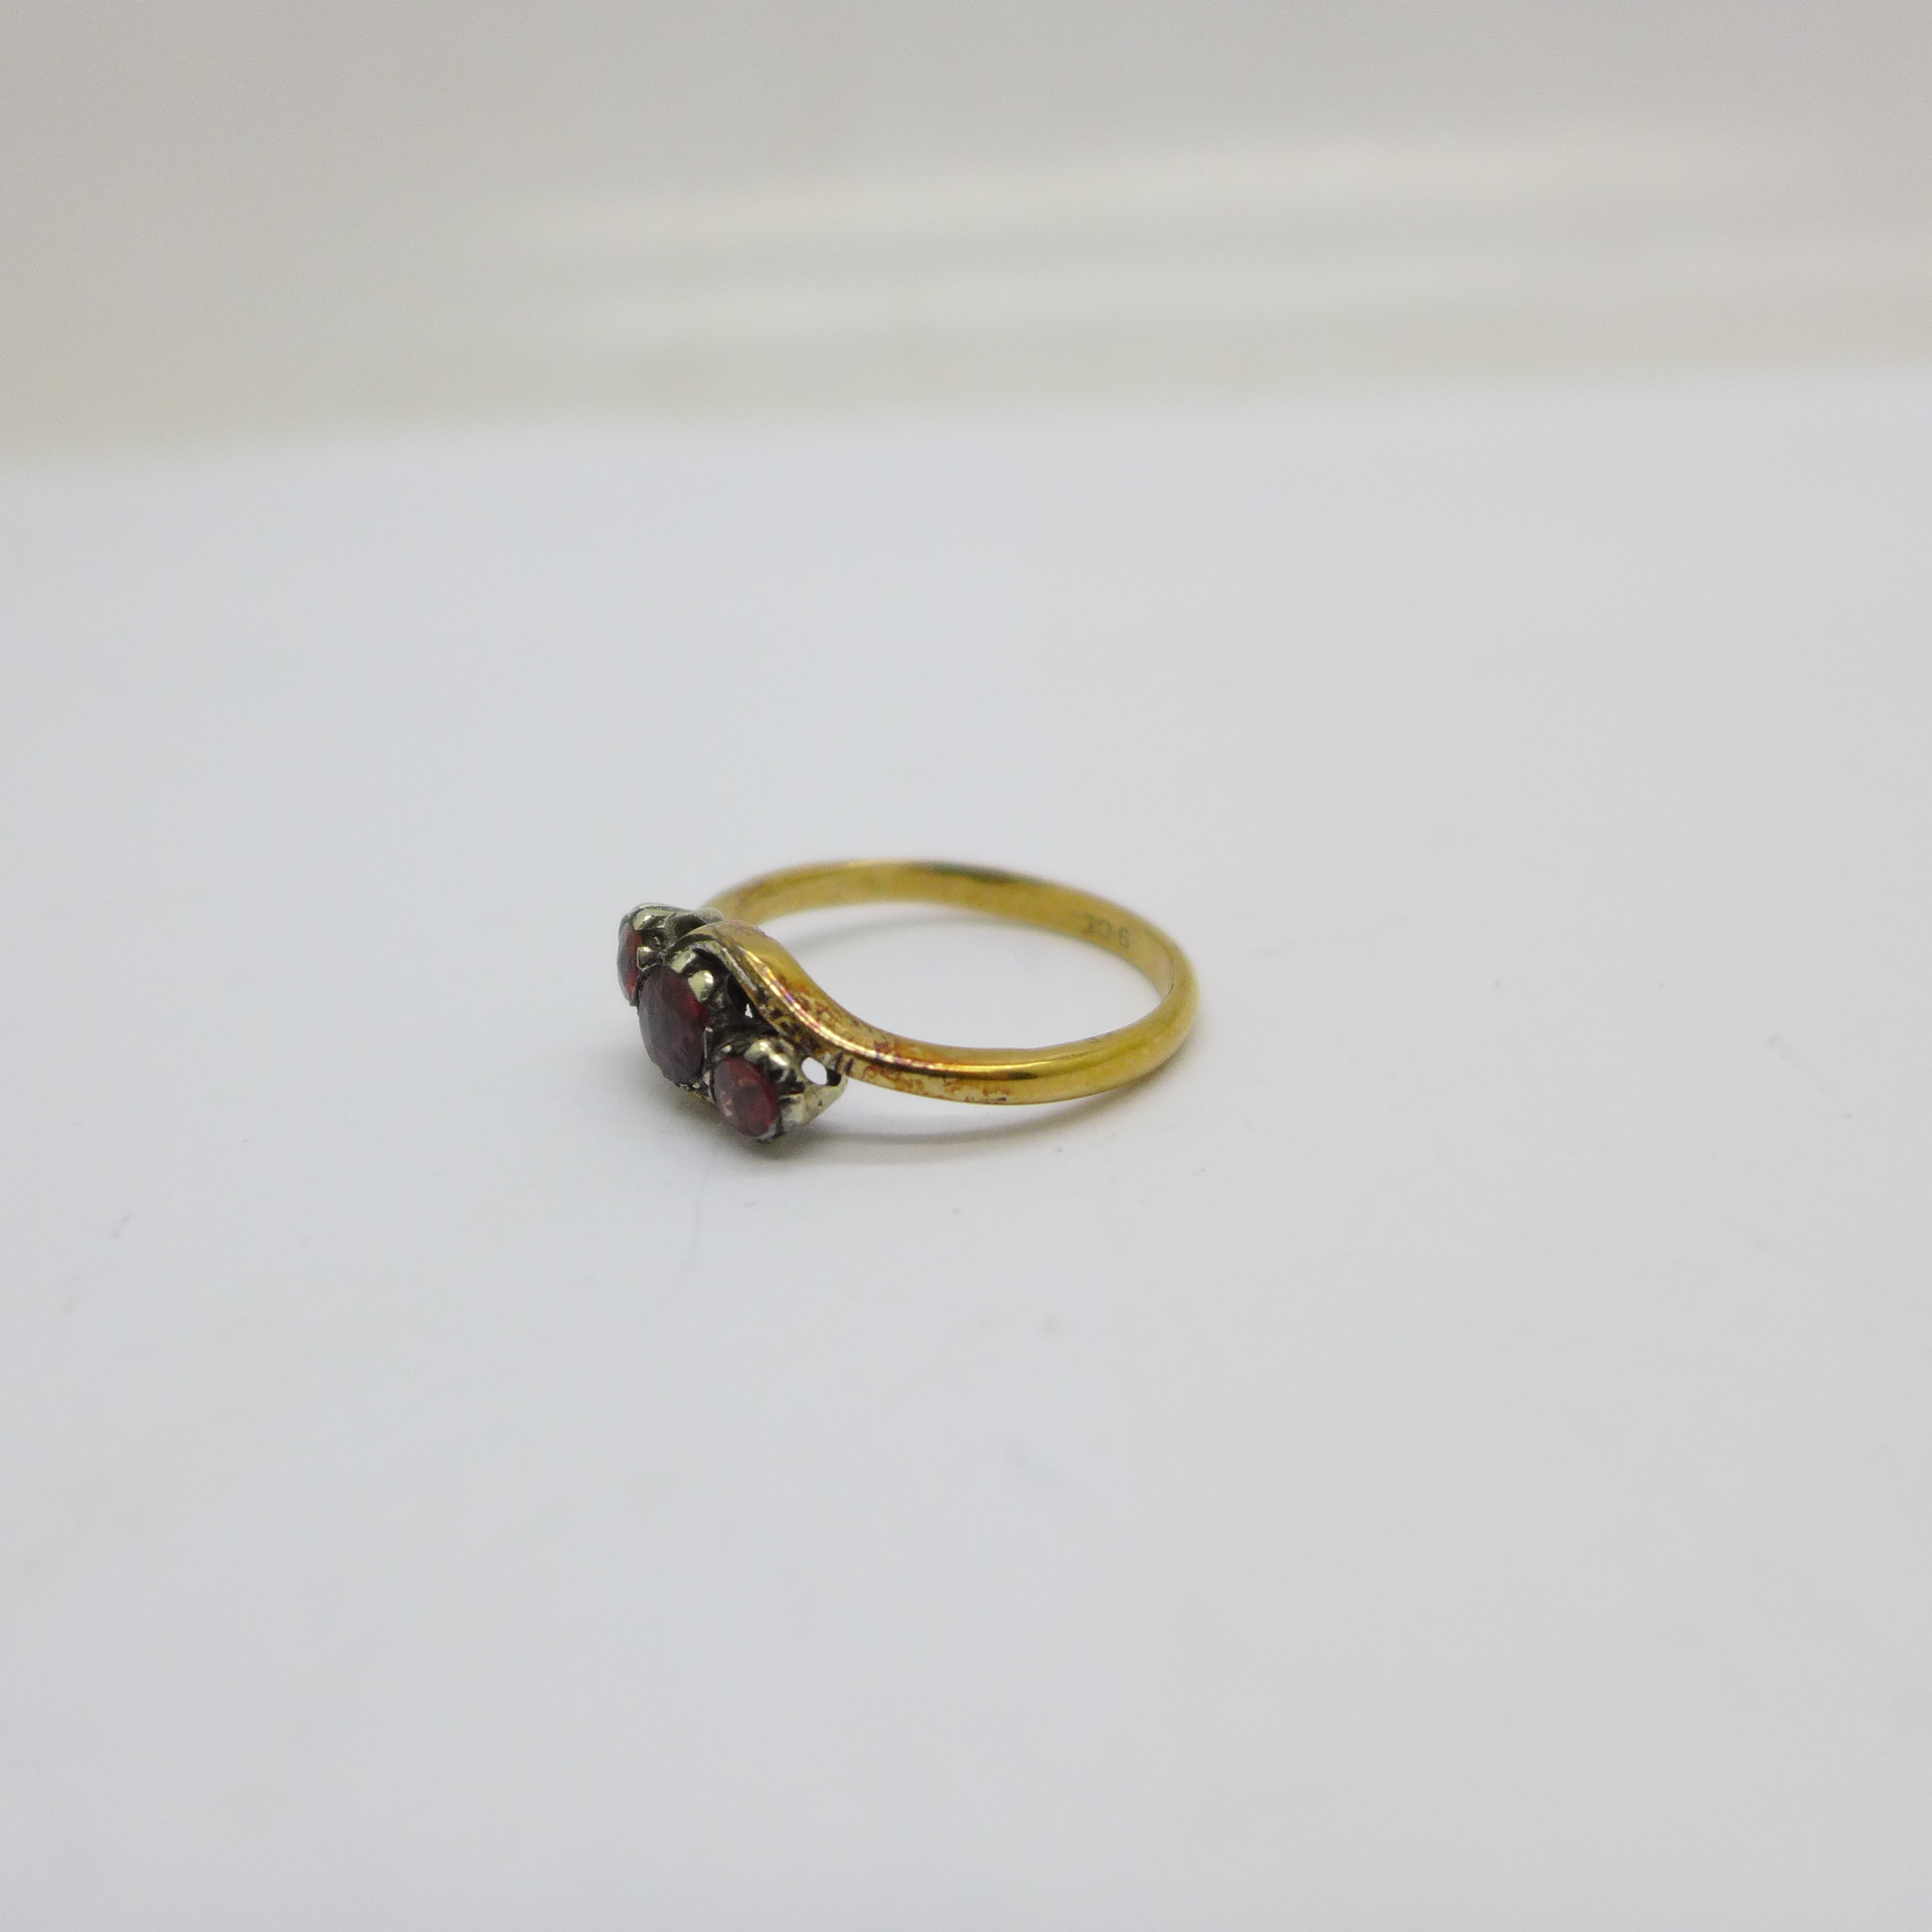 A 9ct gold and garnet ring, 2.1g, M - Image 2 of 3